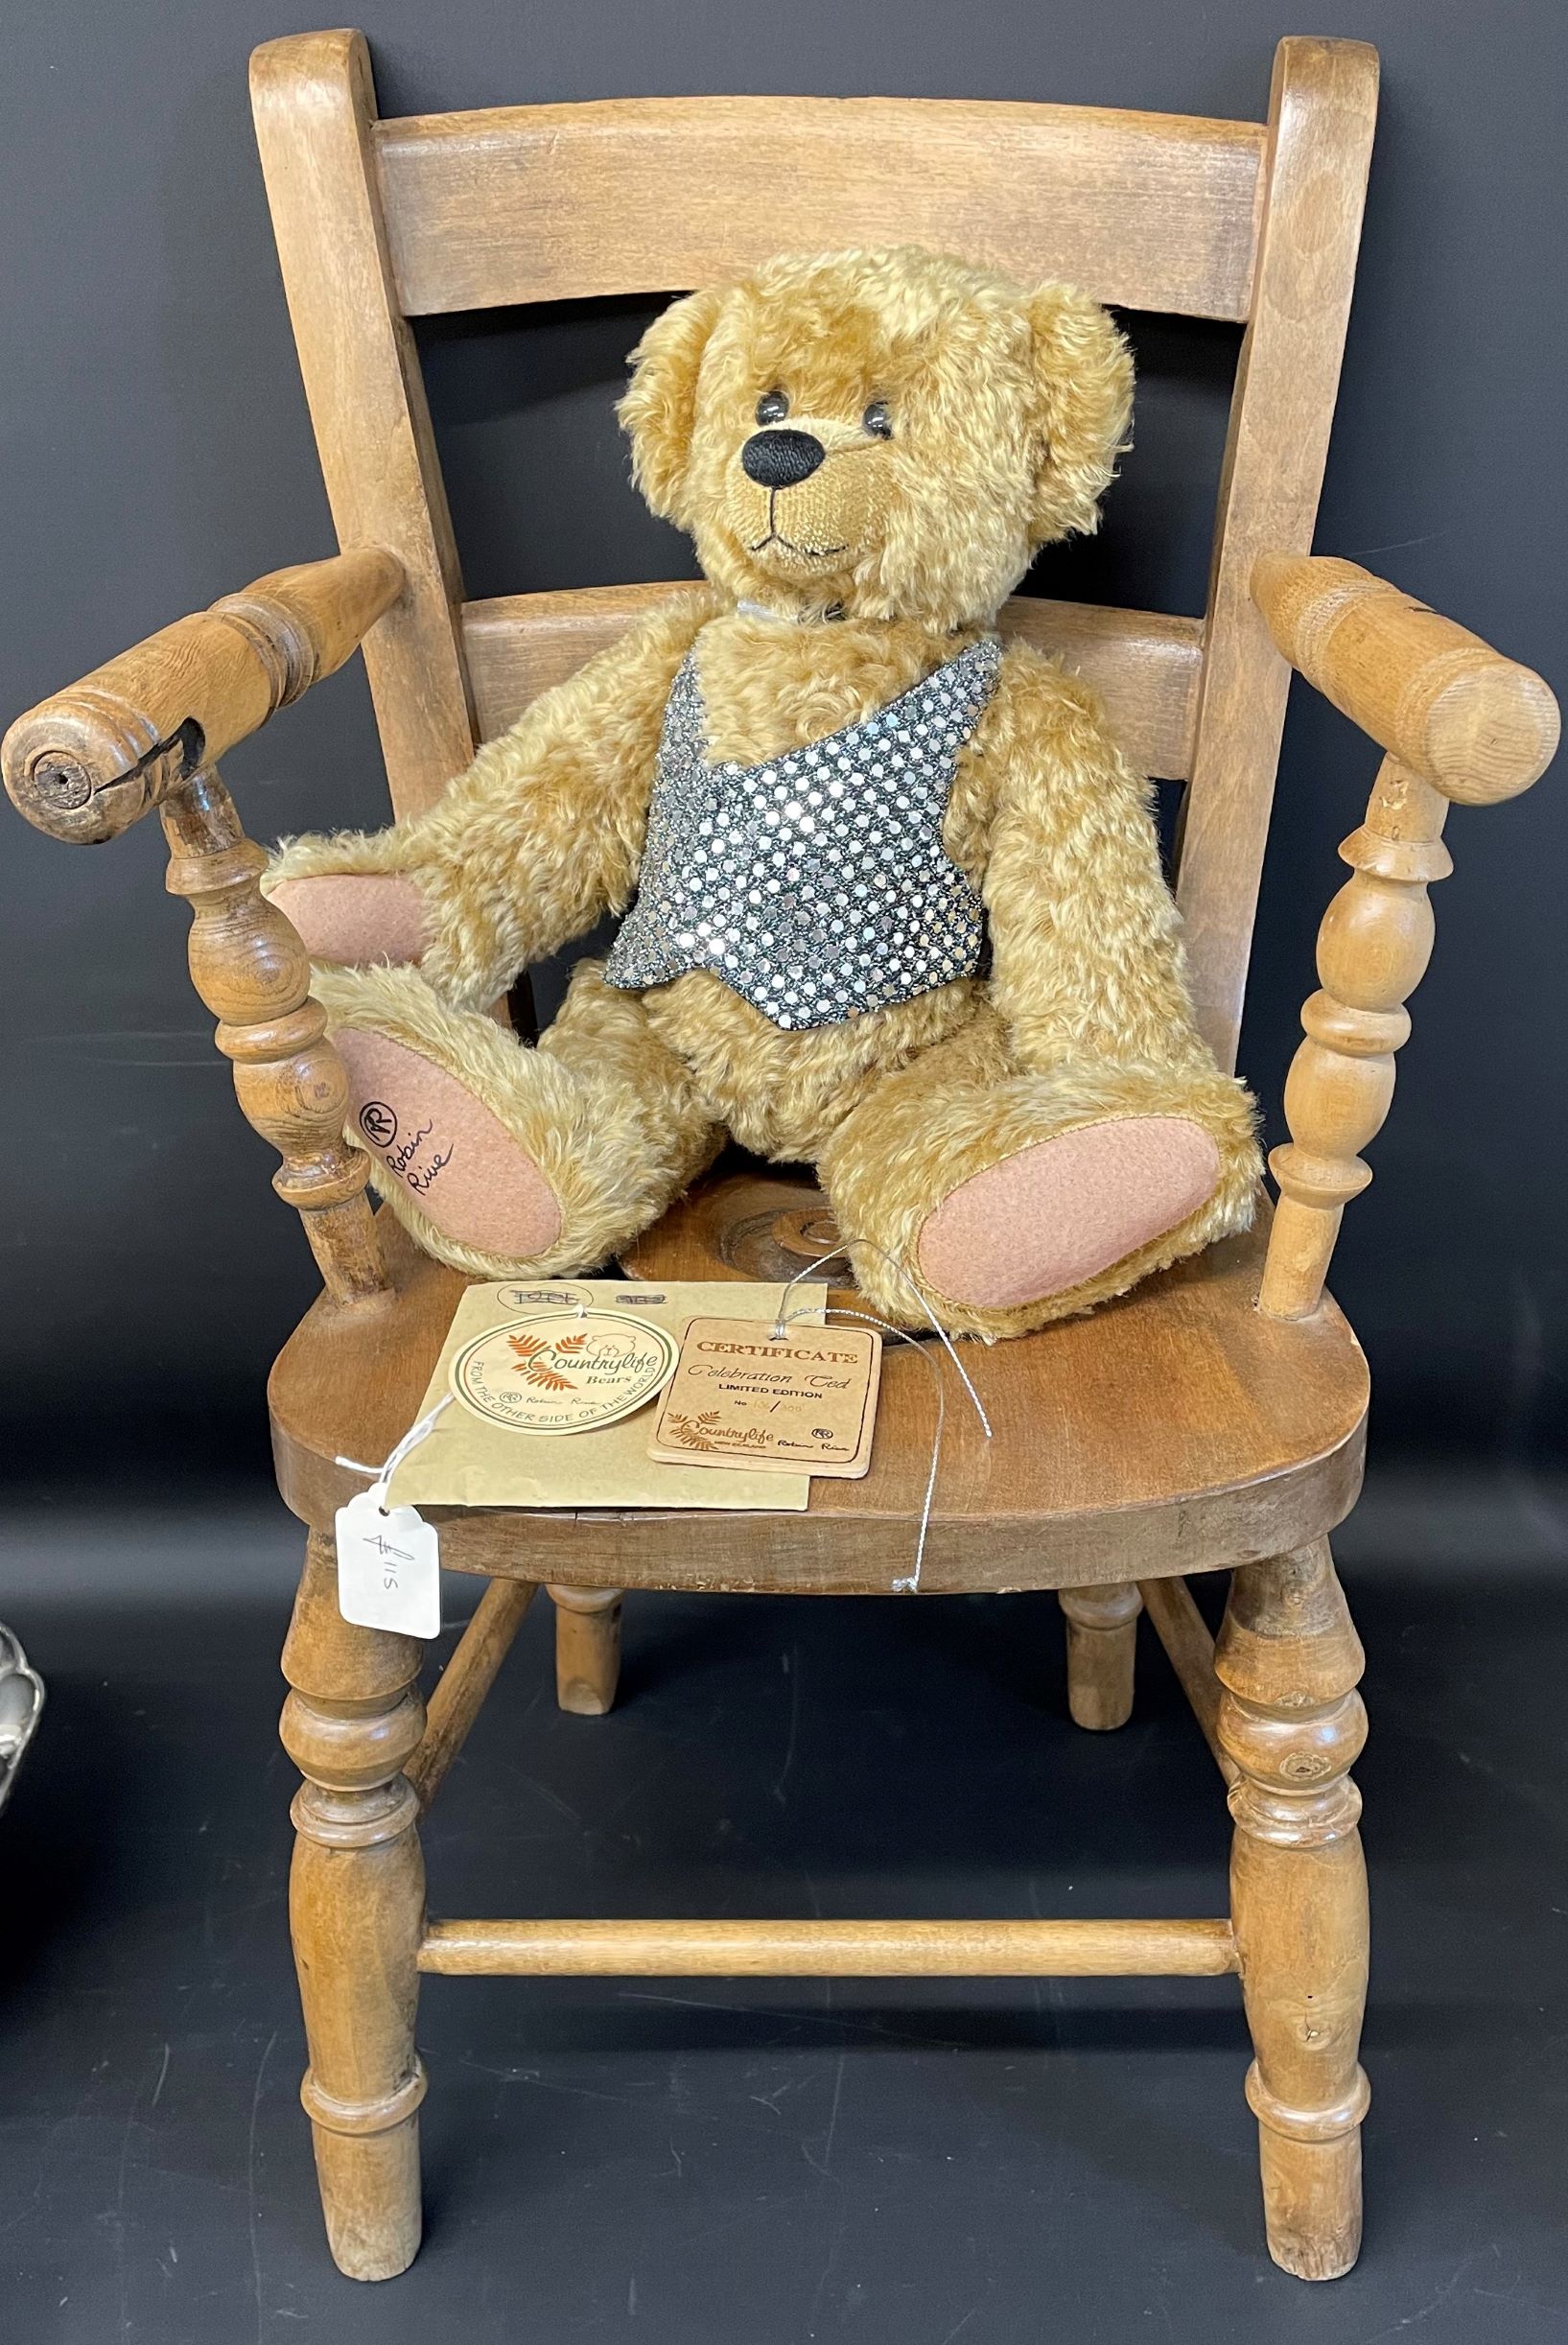 Robin Rive Country Life teddy with original label & a child's commode chair